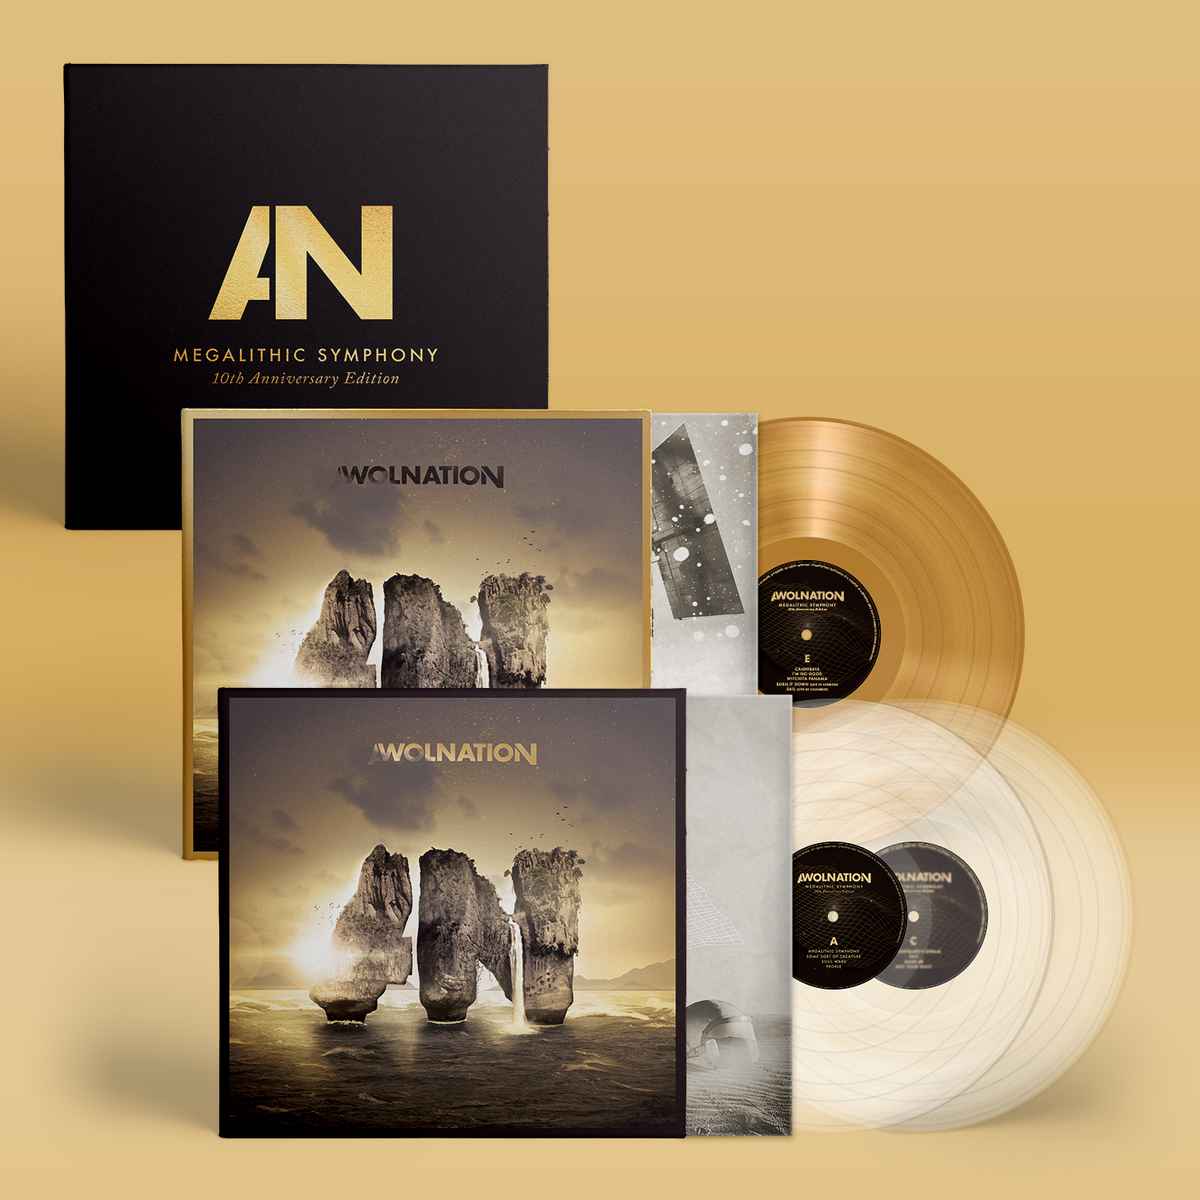 AWOLNATION Megalithic Symphony Deluxe Edition 2CD 2013MTD